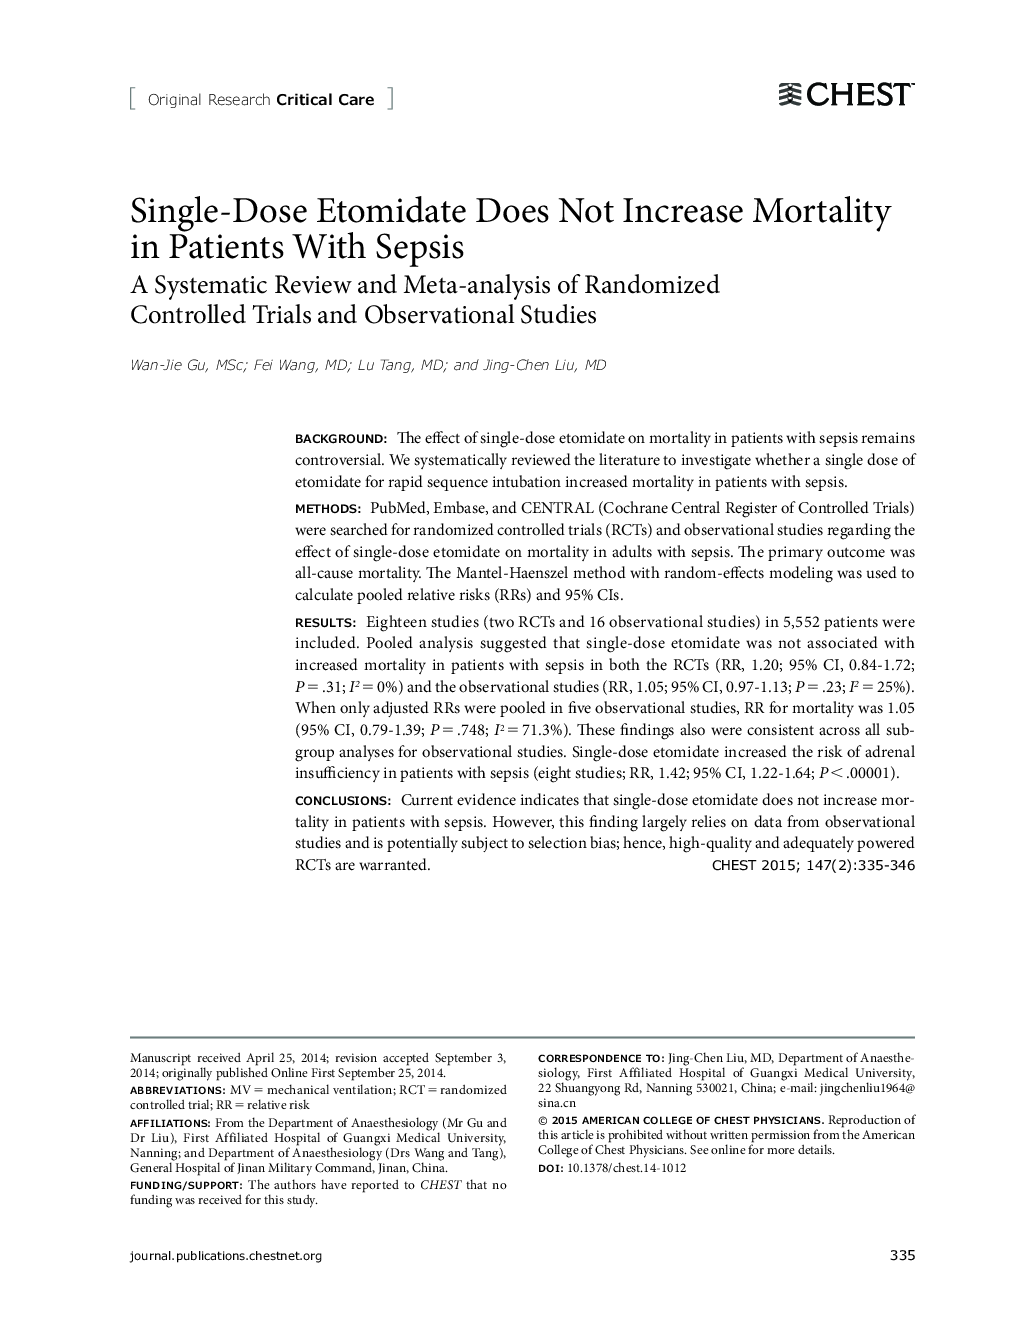 Single-Dose Etomidate Does Not Increase Mortality in Patients With Sepsis